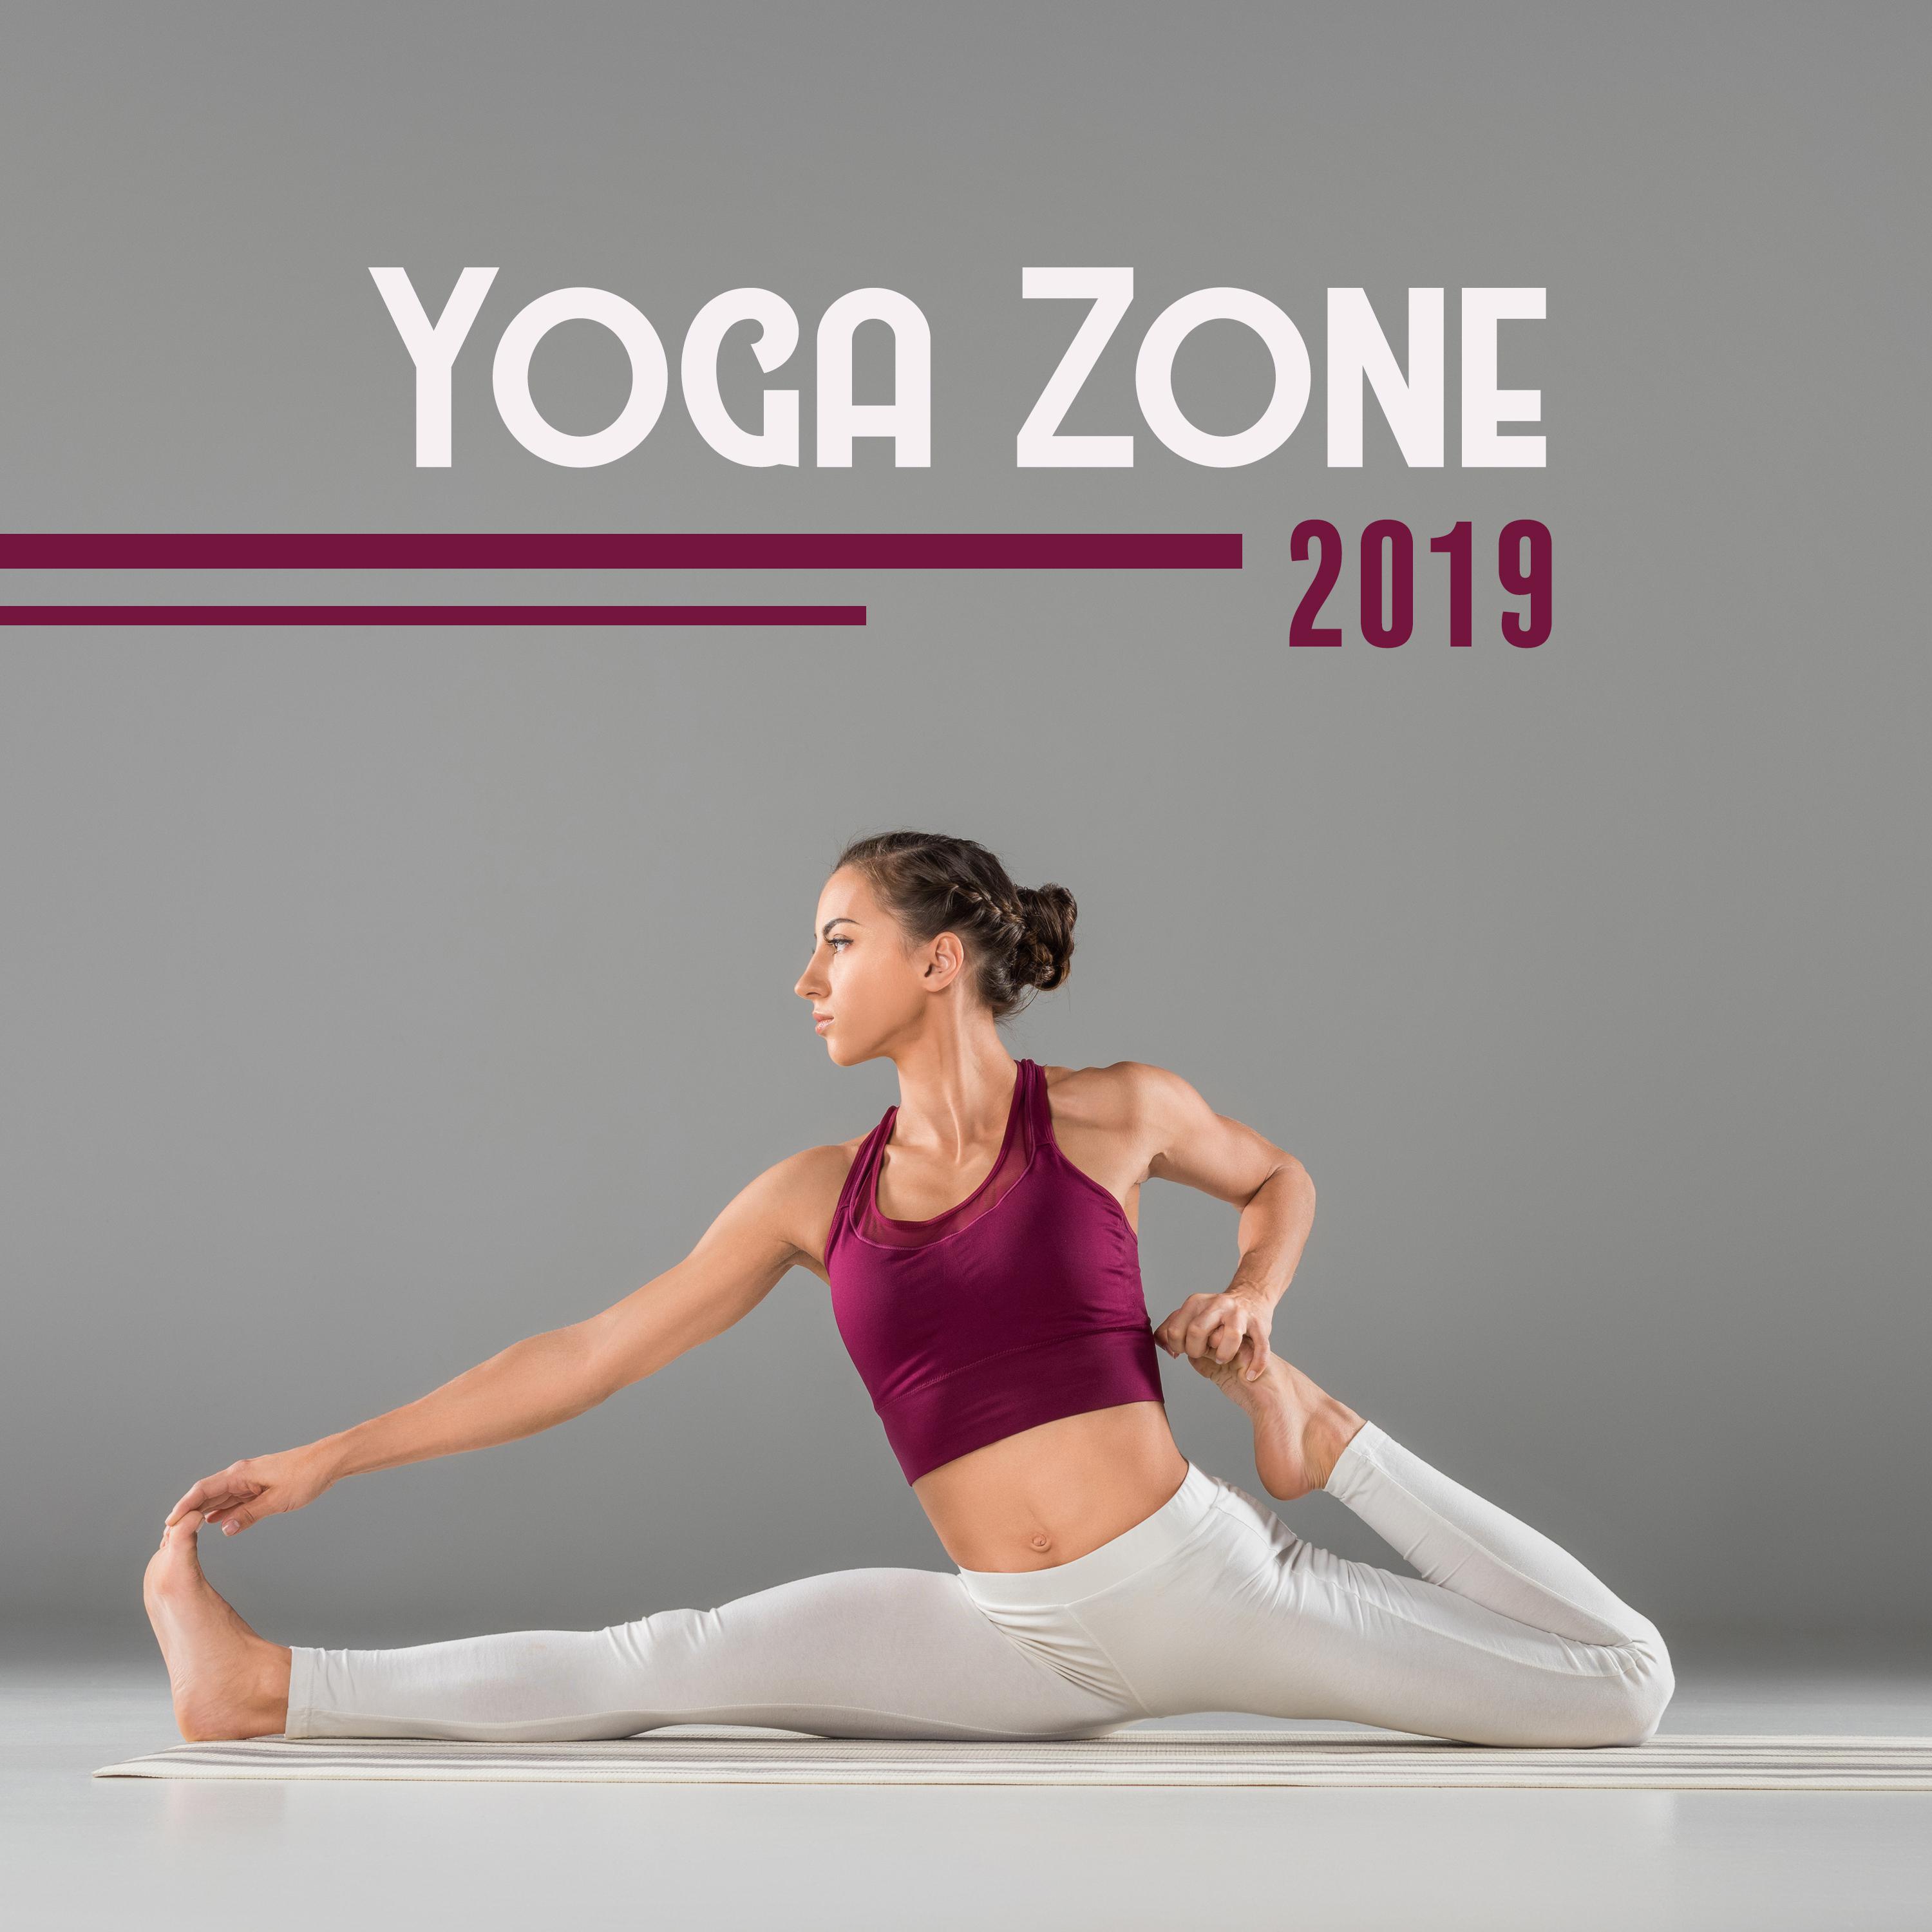 Yoga Zone 2019 – Meditation Therapy to Calm Down, Ambient Yoga, Yoga Practice, Inner Balance, Deep Harmony, Spiritual Music to Rest